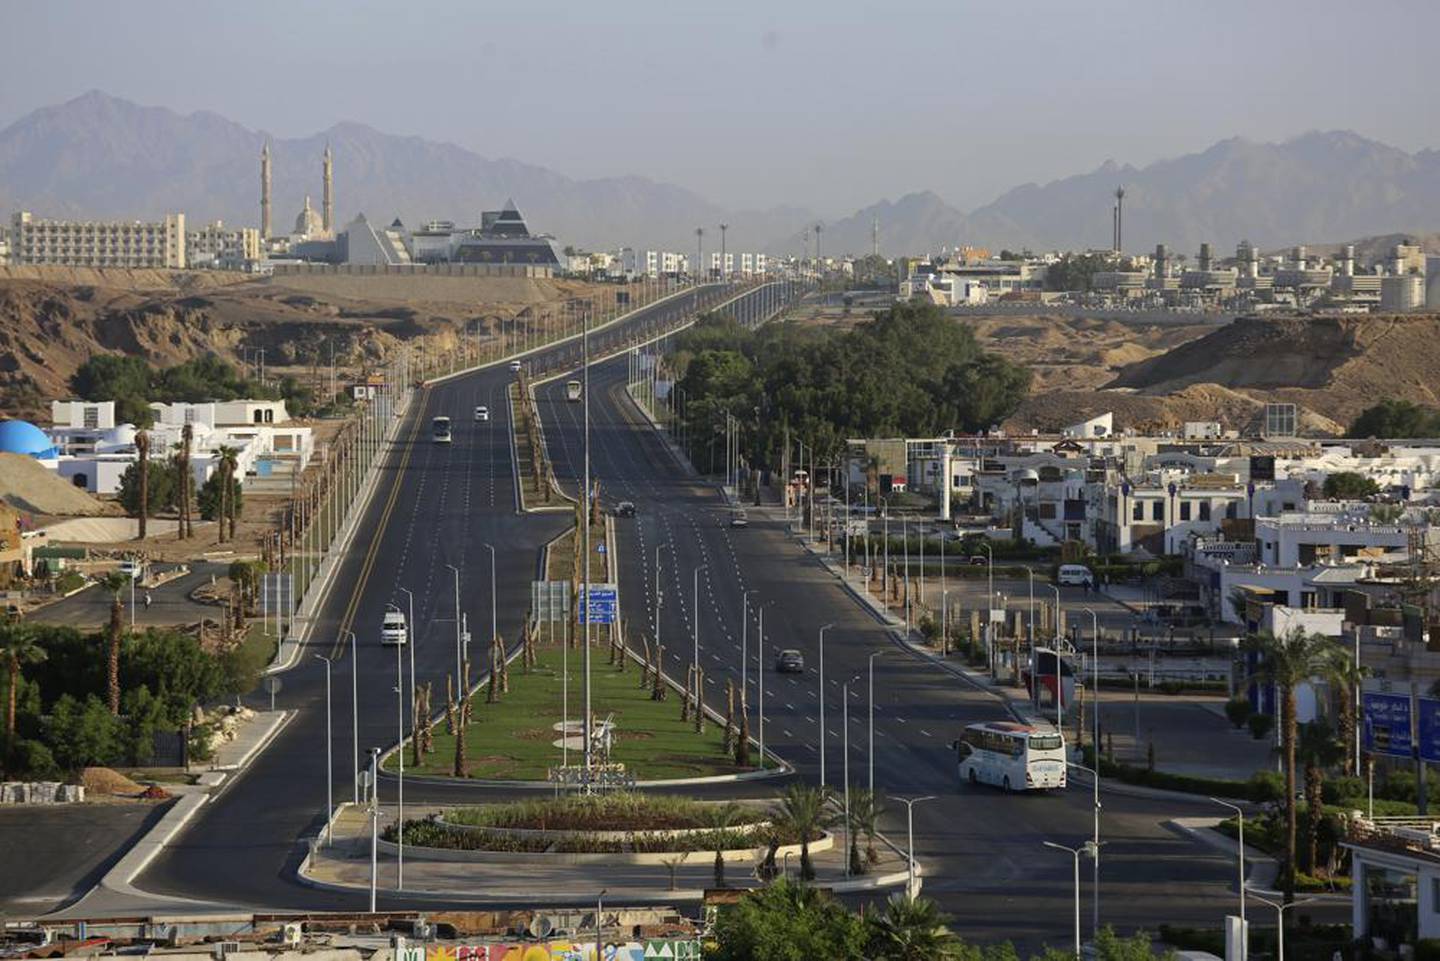 A 10-lane highway, part of the refurbishing of the city for this year’s United Nations global summit on climate change. Photo / AP